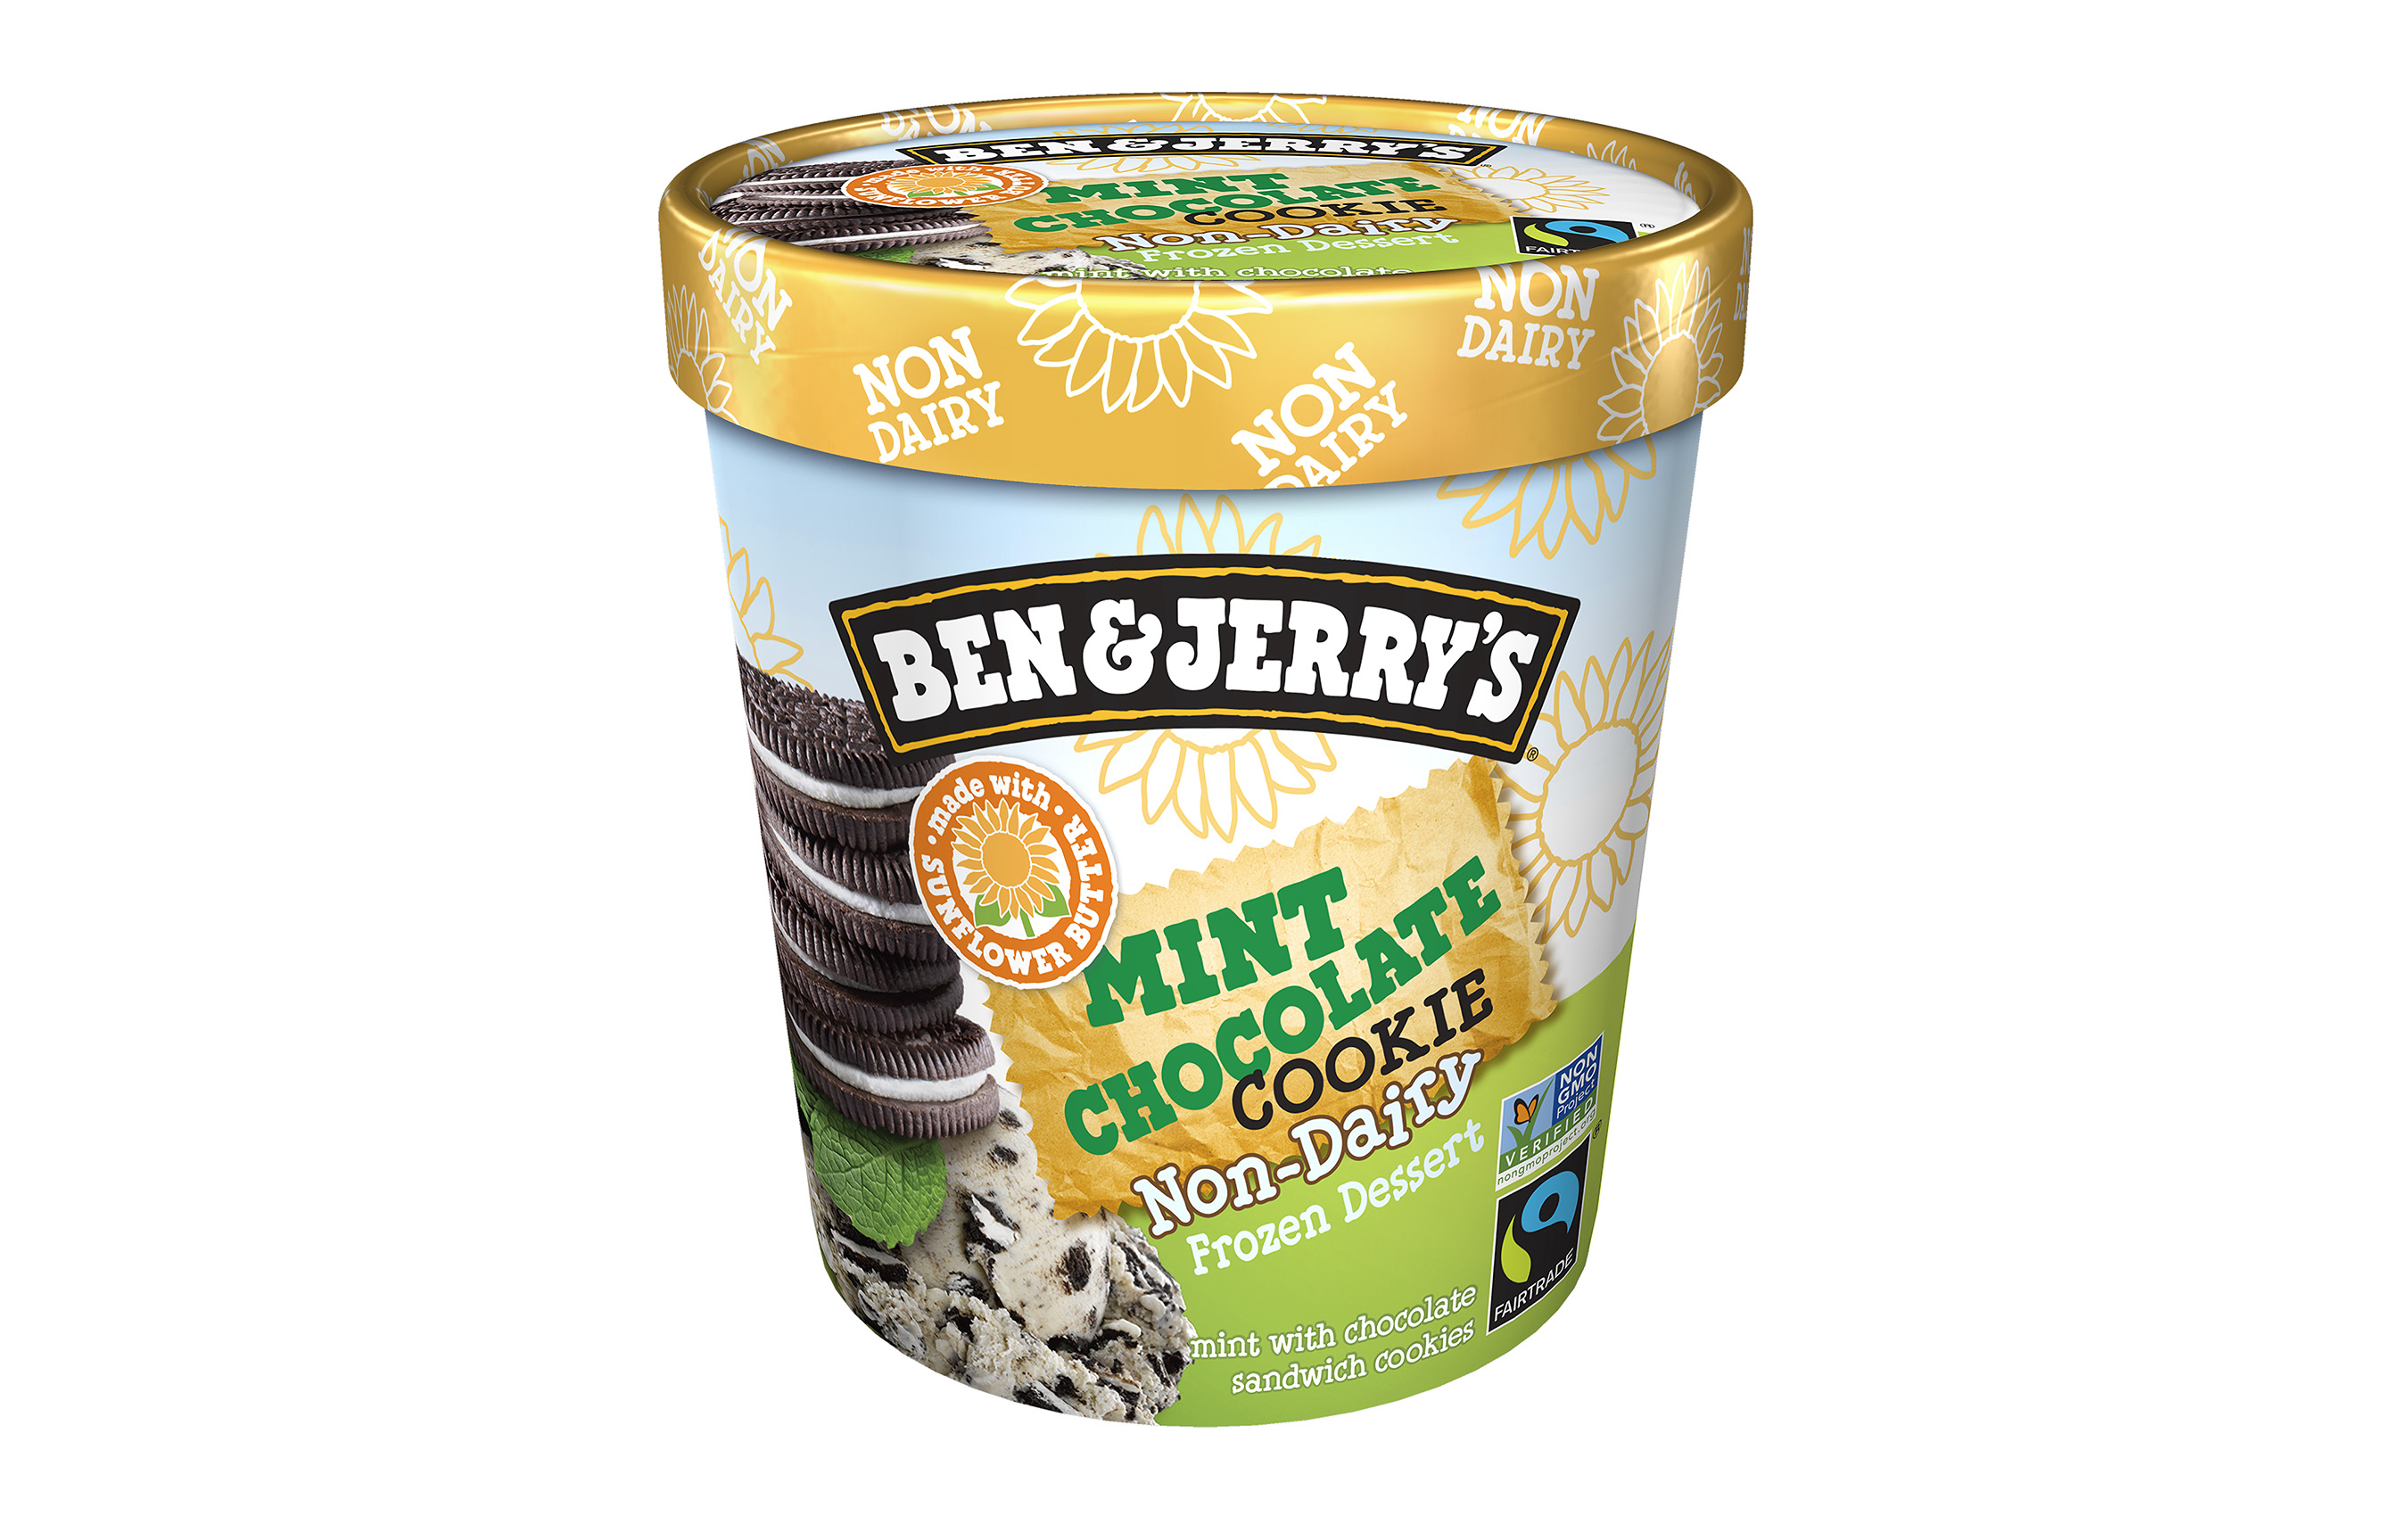 Ben & Jerry's launches sunflower butter based Mint Chocolate Cookie, a mint non-dairy frozen dessert with chocolate sandwich cookies.